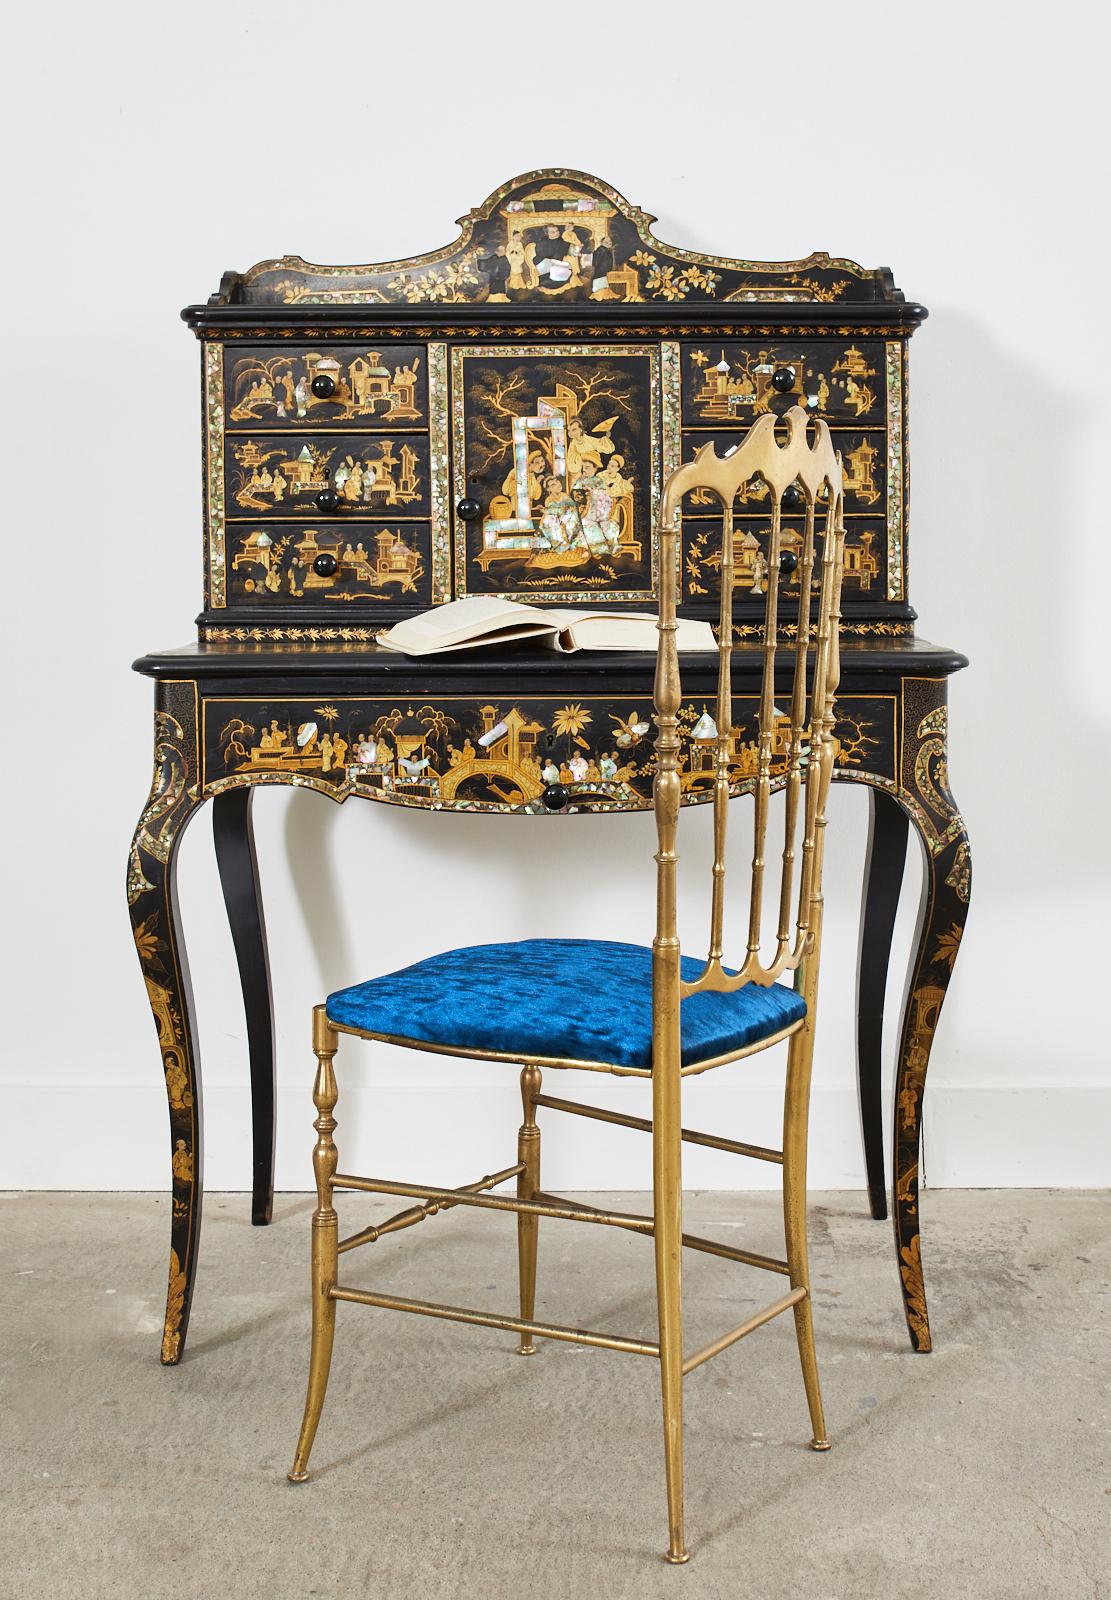 Extraordinary 19th century English ladies secretaire desk or writing table. The two part desk was made in the Chinoiserie revival period of Europe in the mid-19th century. The desk features a Japanned oak case embellished with highly detailed inlay